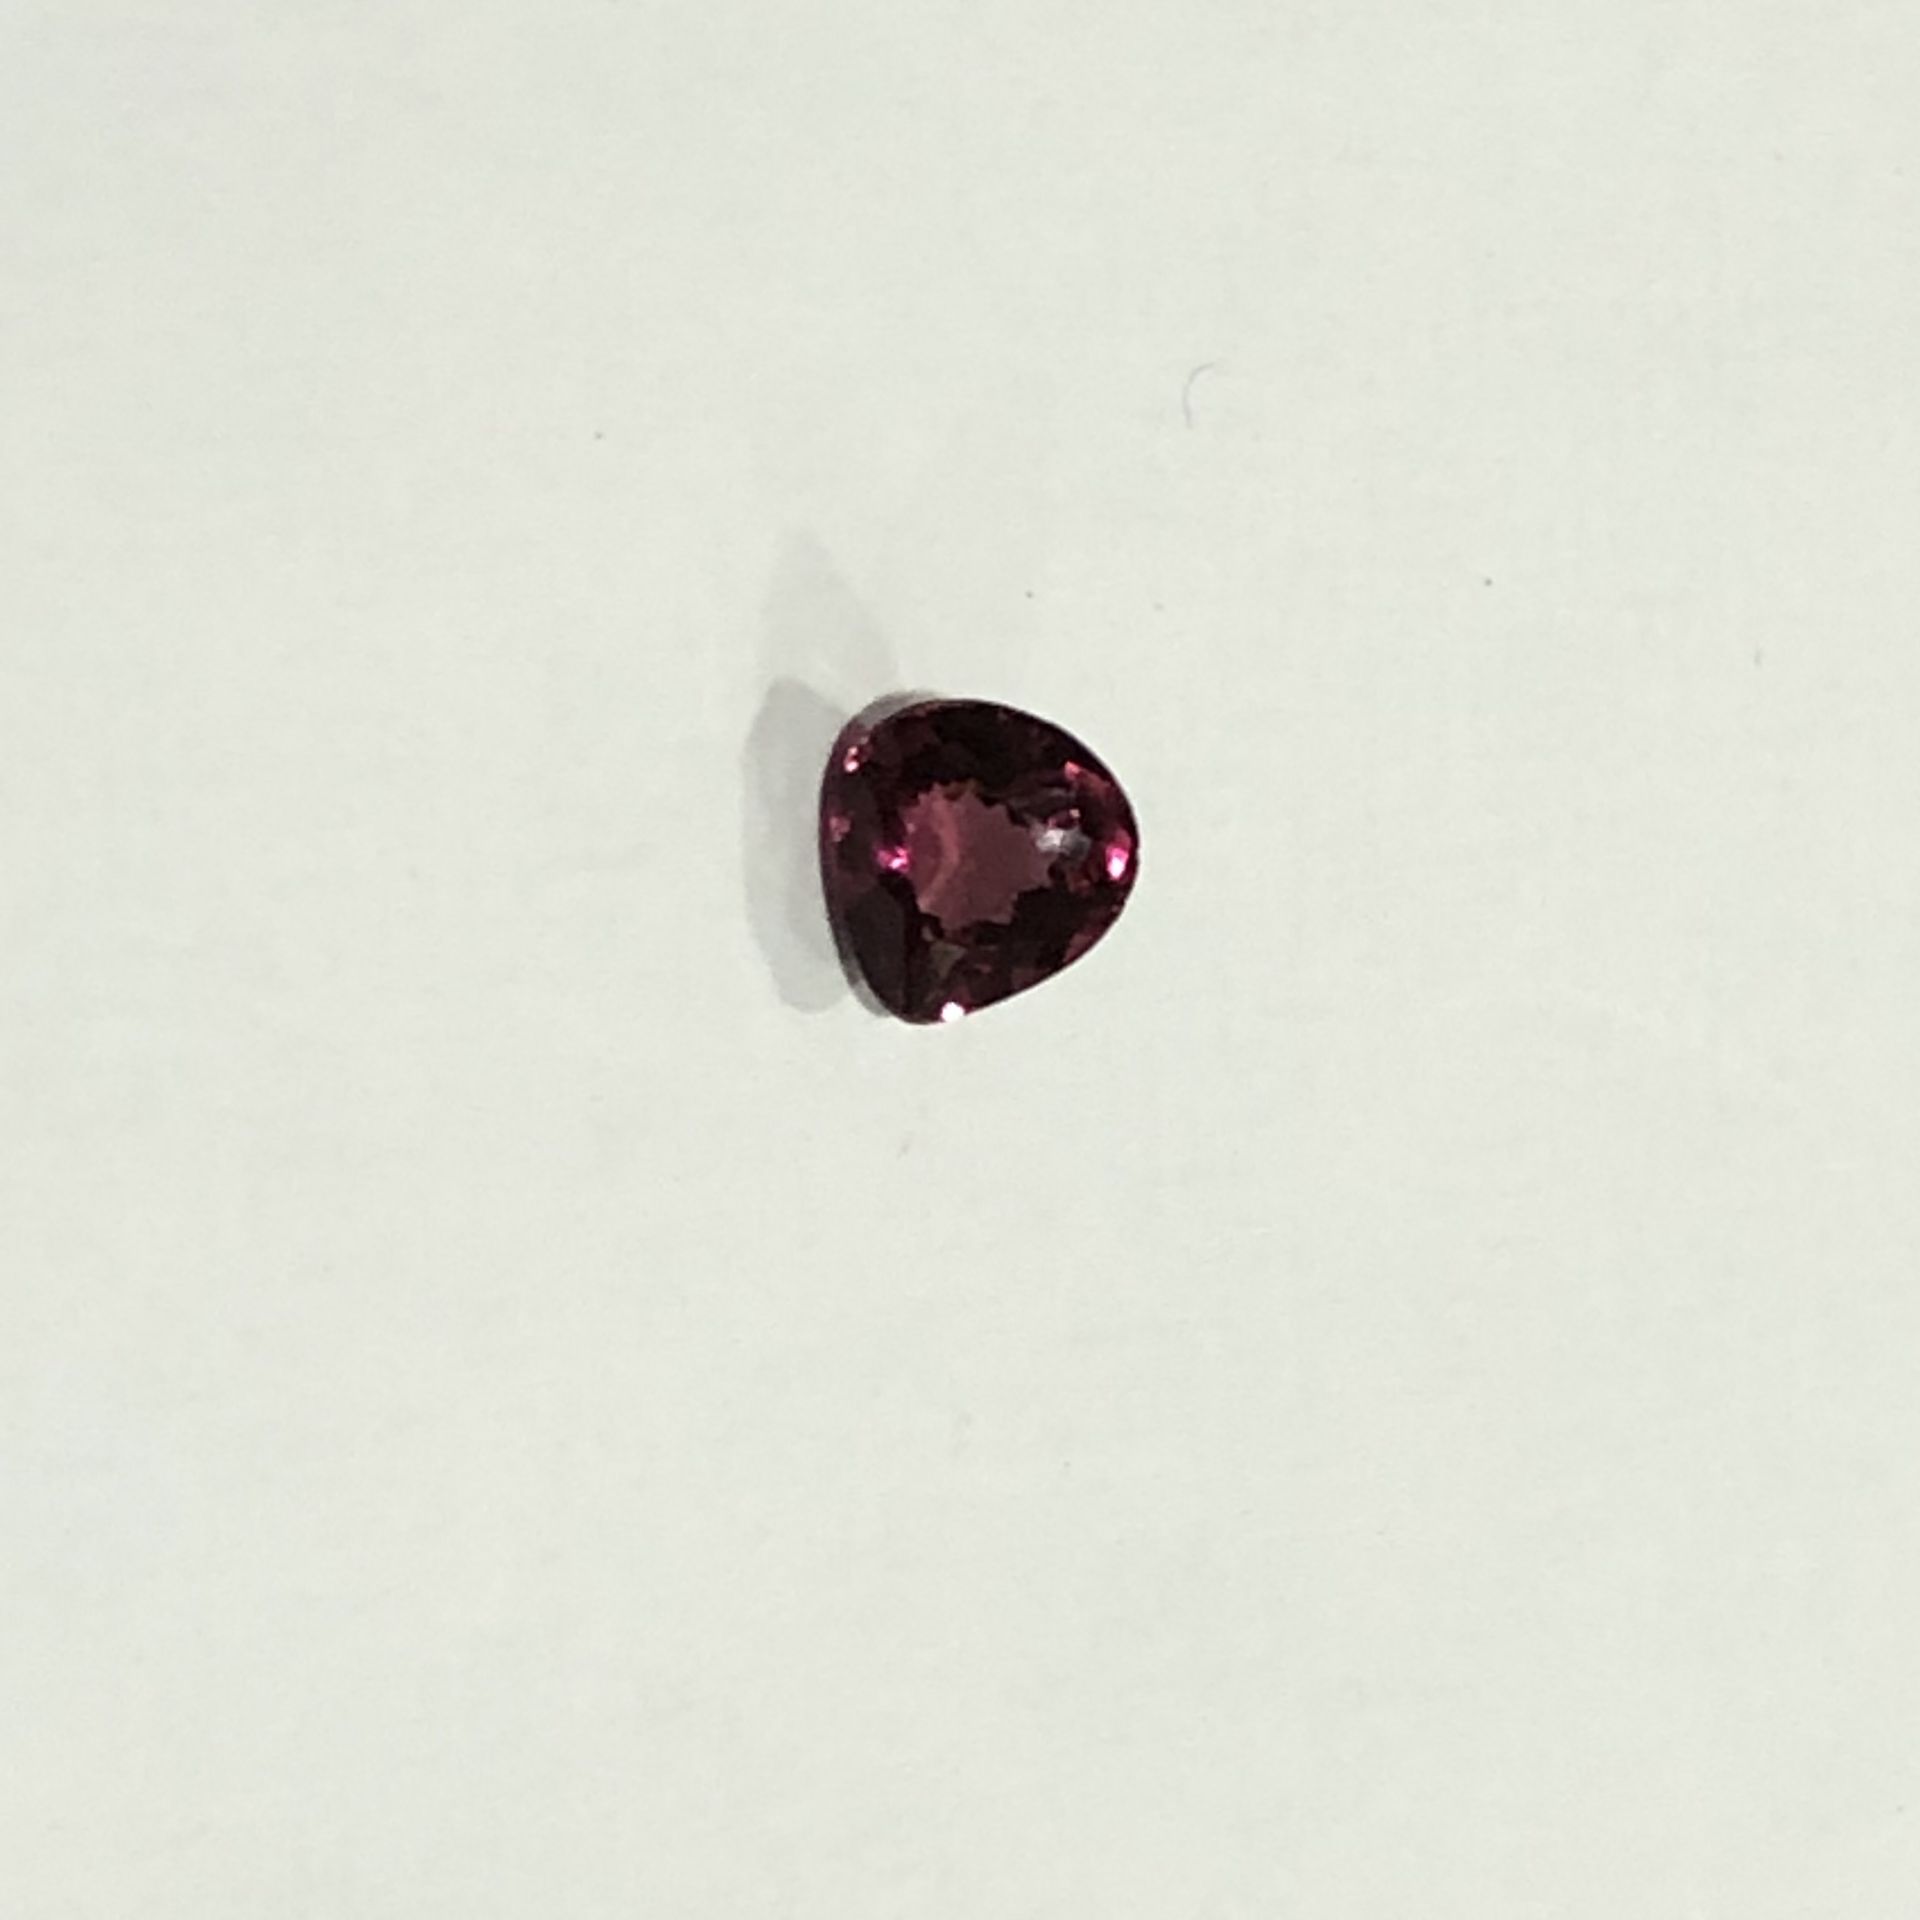 0.79ct Natural Rubellite with IGI Certificate - Image 6 of 8